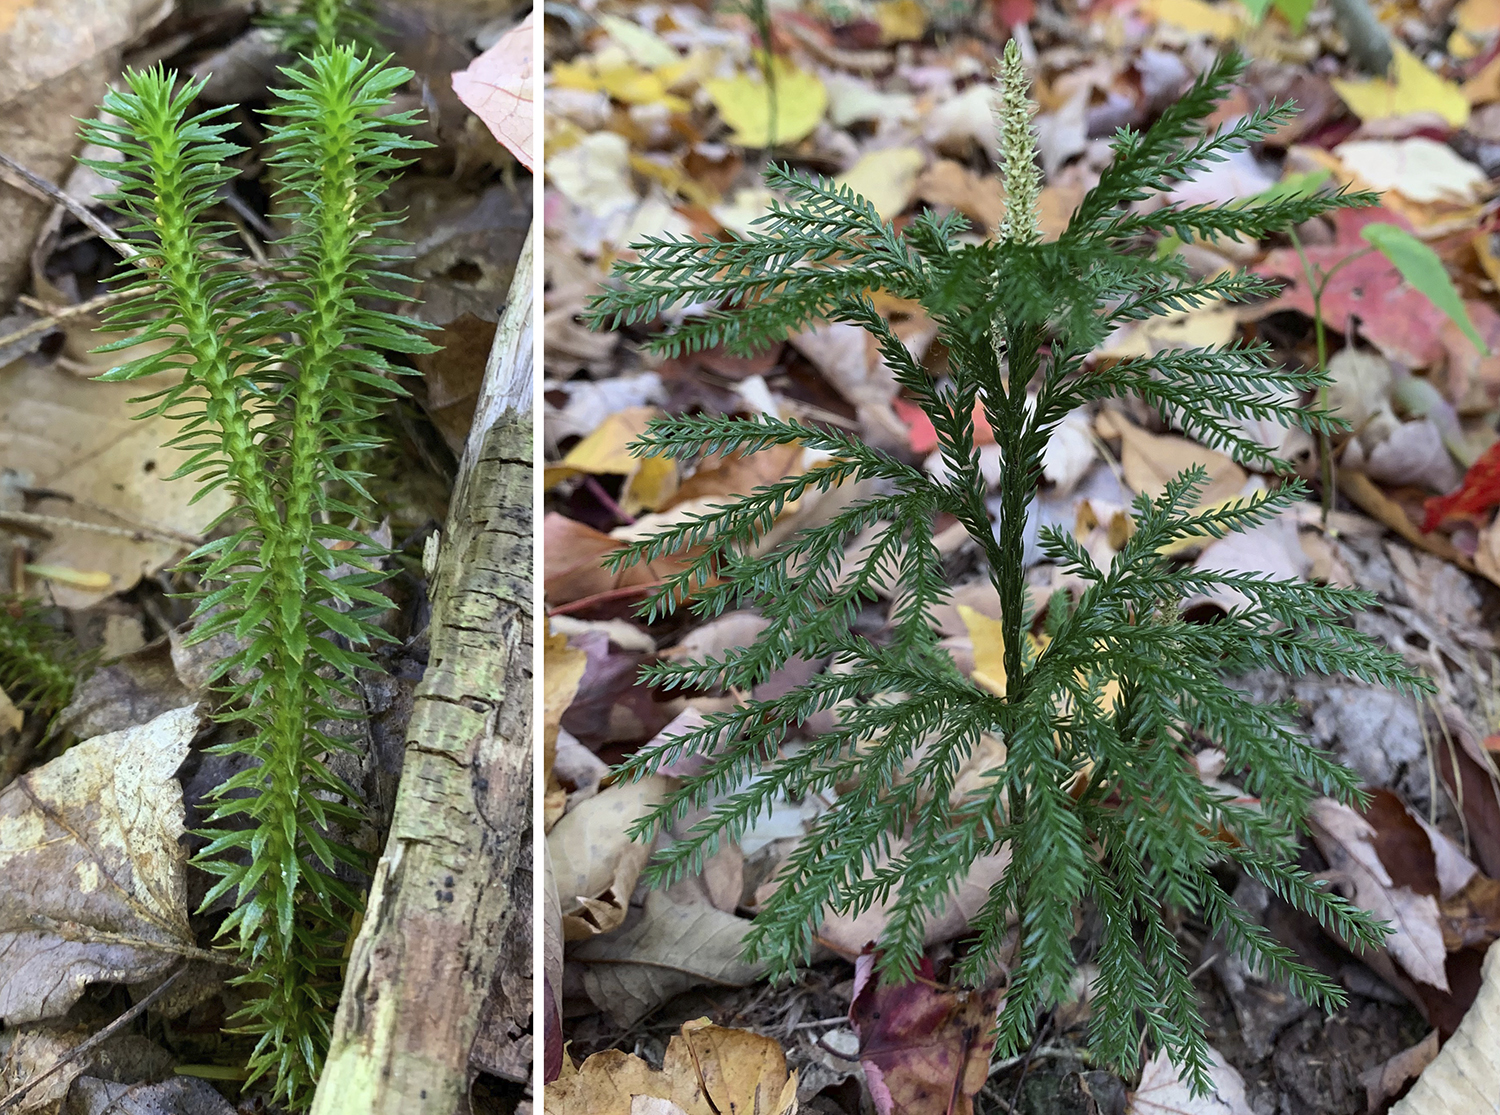 2-Panel photo figure. Panel 1: Shining firmoss showing a single dichotomy with two equal branches. Panel 2: Clubmoss that appears to have a central stem with lateral branching units.